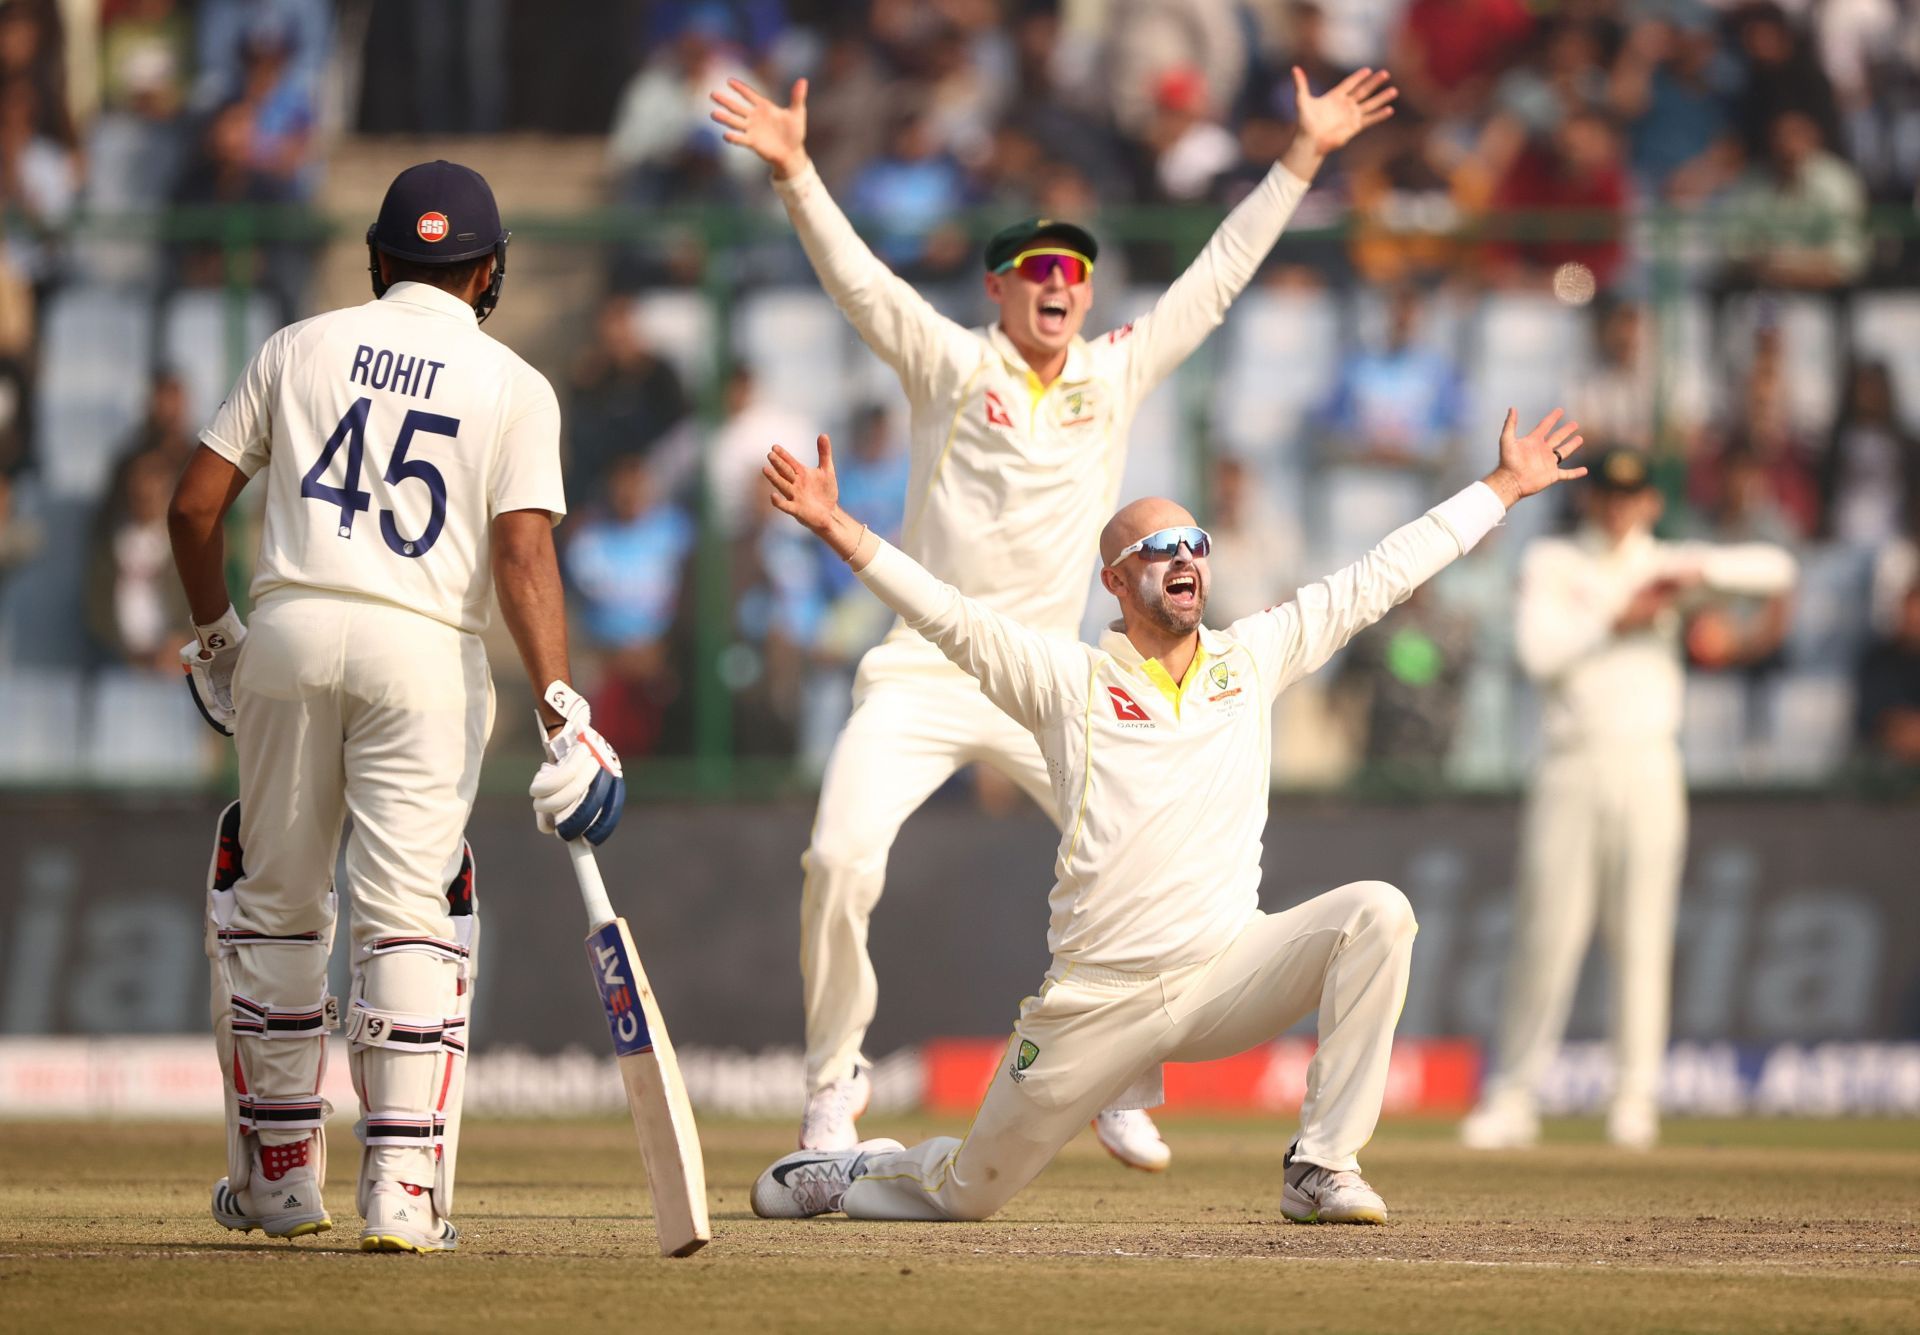 Nathan Lyon in full flow (Image: Getty)